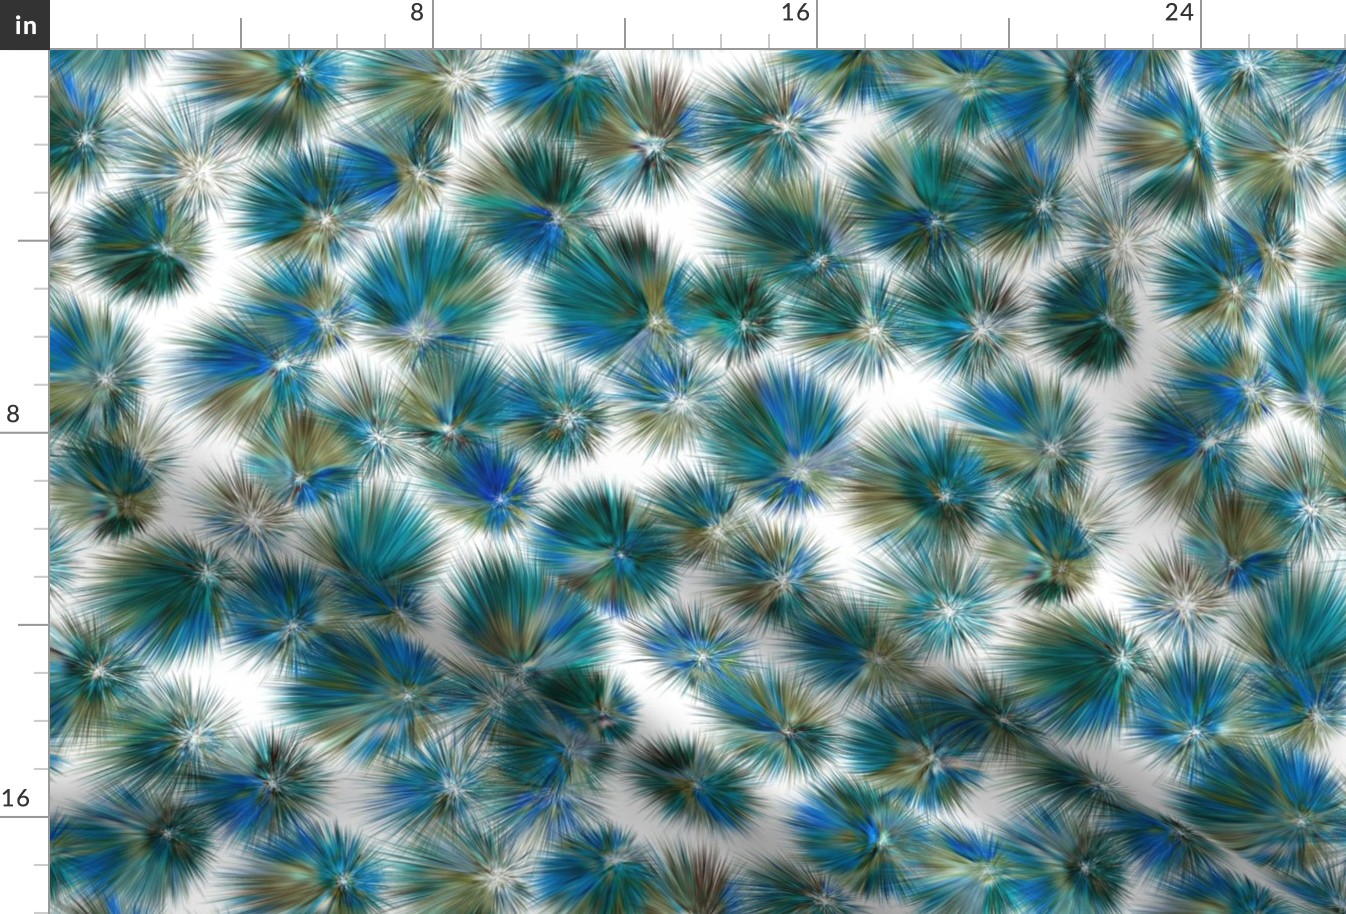 Abstract Thistle Flowers - 01-L - Turquoise Cobalt Ecru Brown White - 3H-Art - Oda - Fine Textured - Contemporary Abstract Art - Modern Seamless Flower Pattern